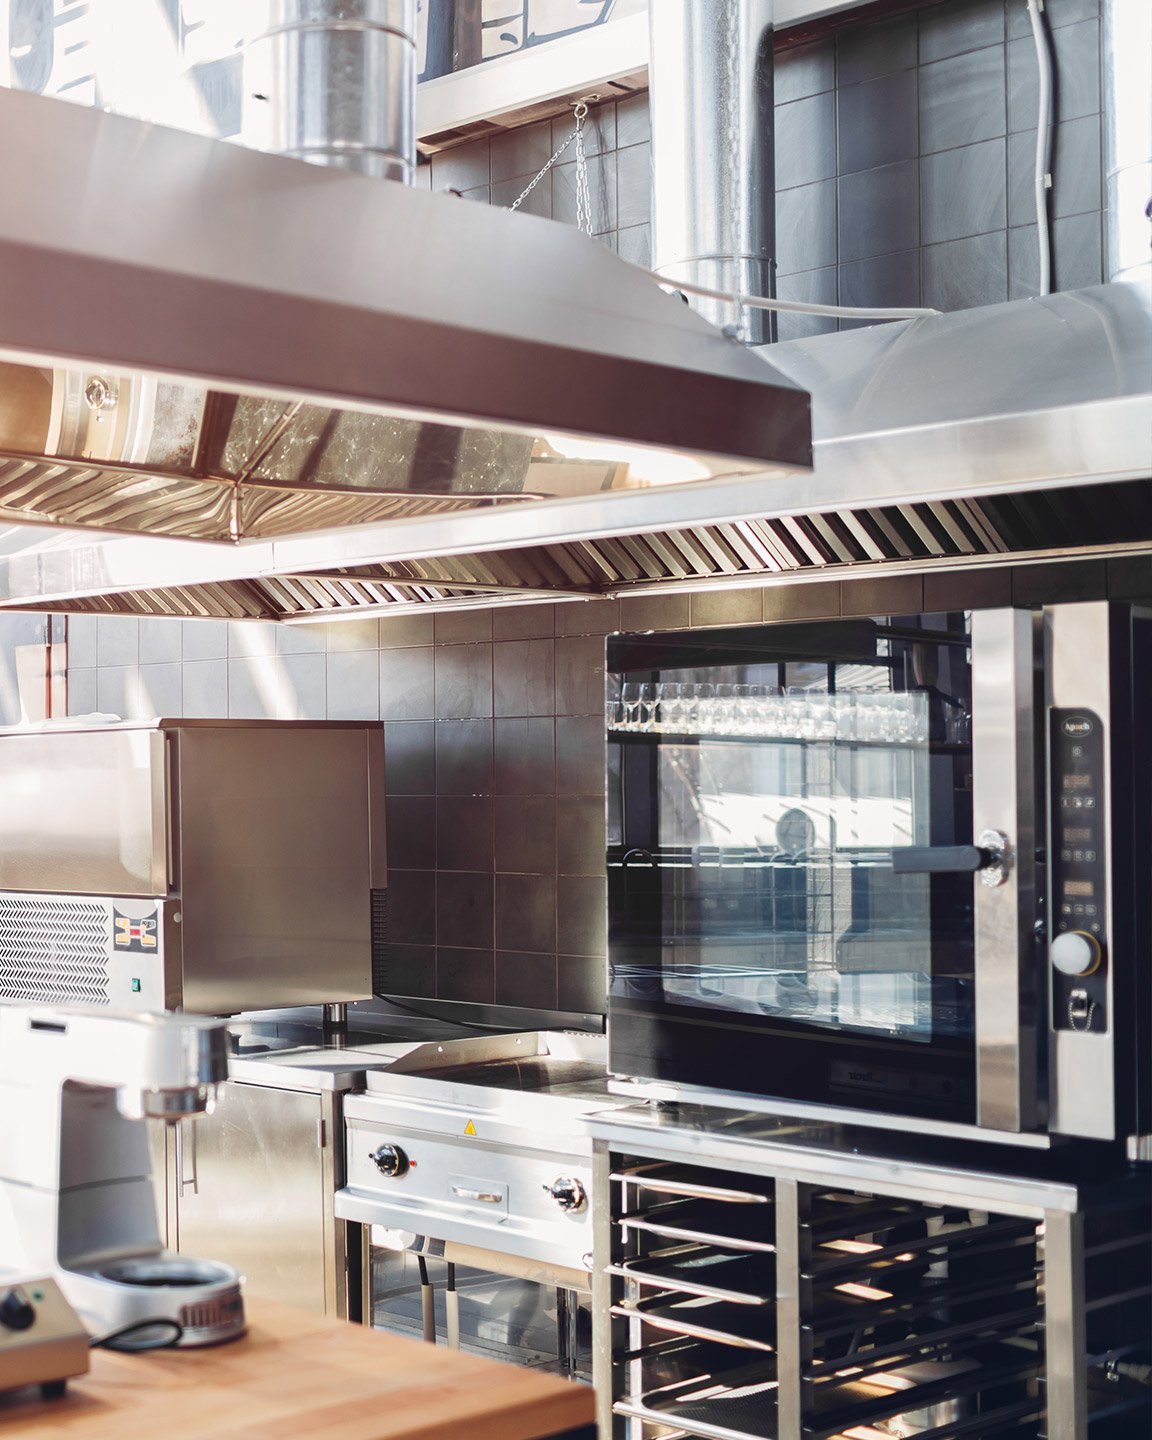 Stainless Steel and Hardwood Themed Restaurant Kitchen